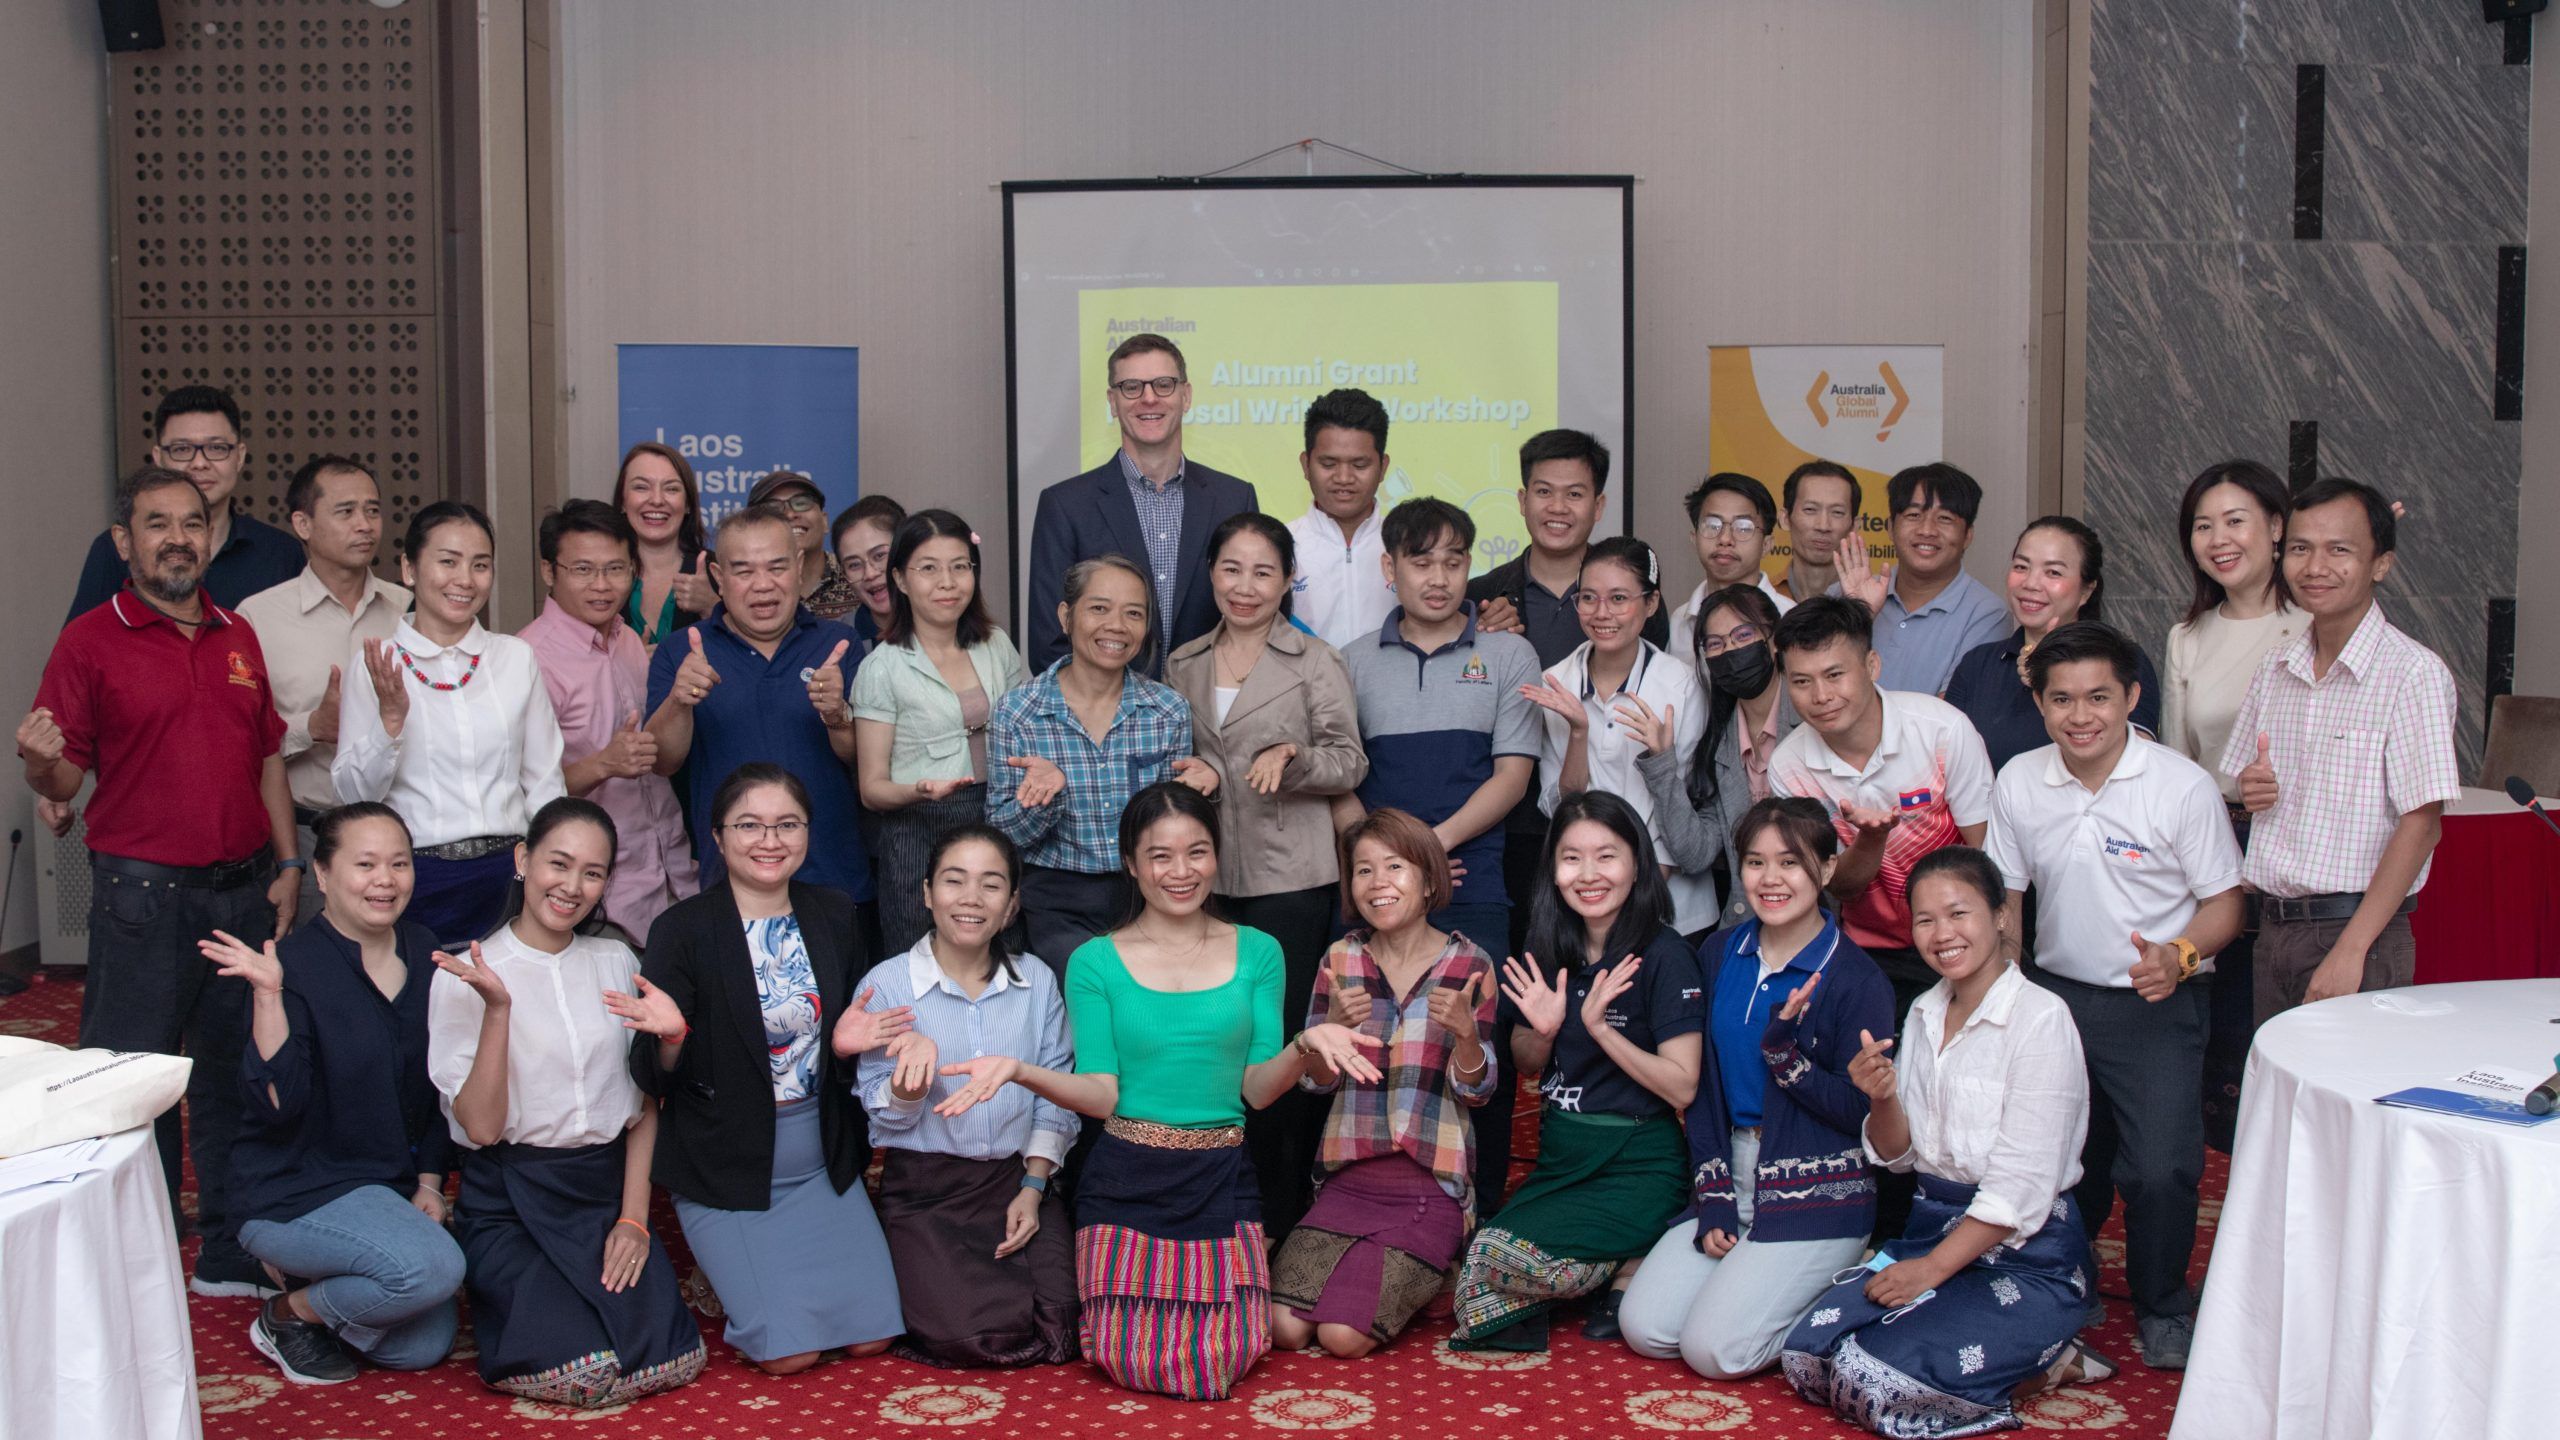 We are pleased to congratulate a select number of Australian alumni on the successful completion of the `Proposal Grants Writing for Lao’ training.